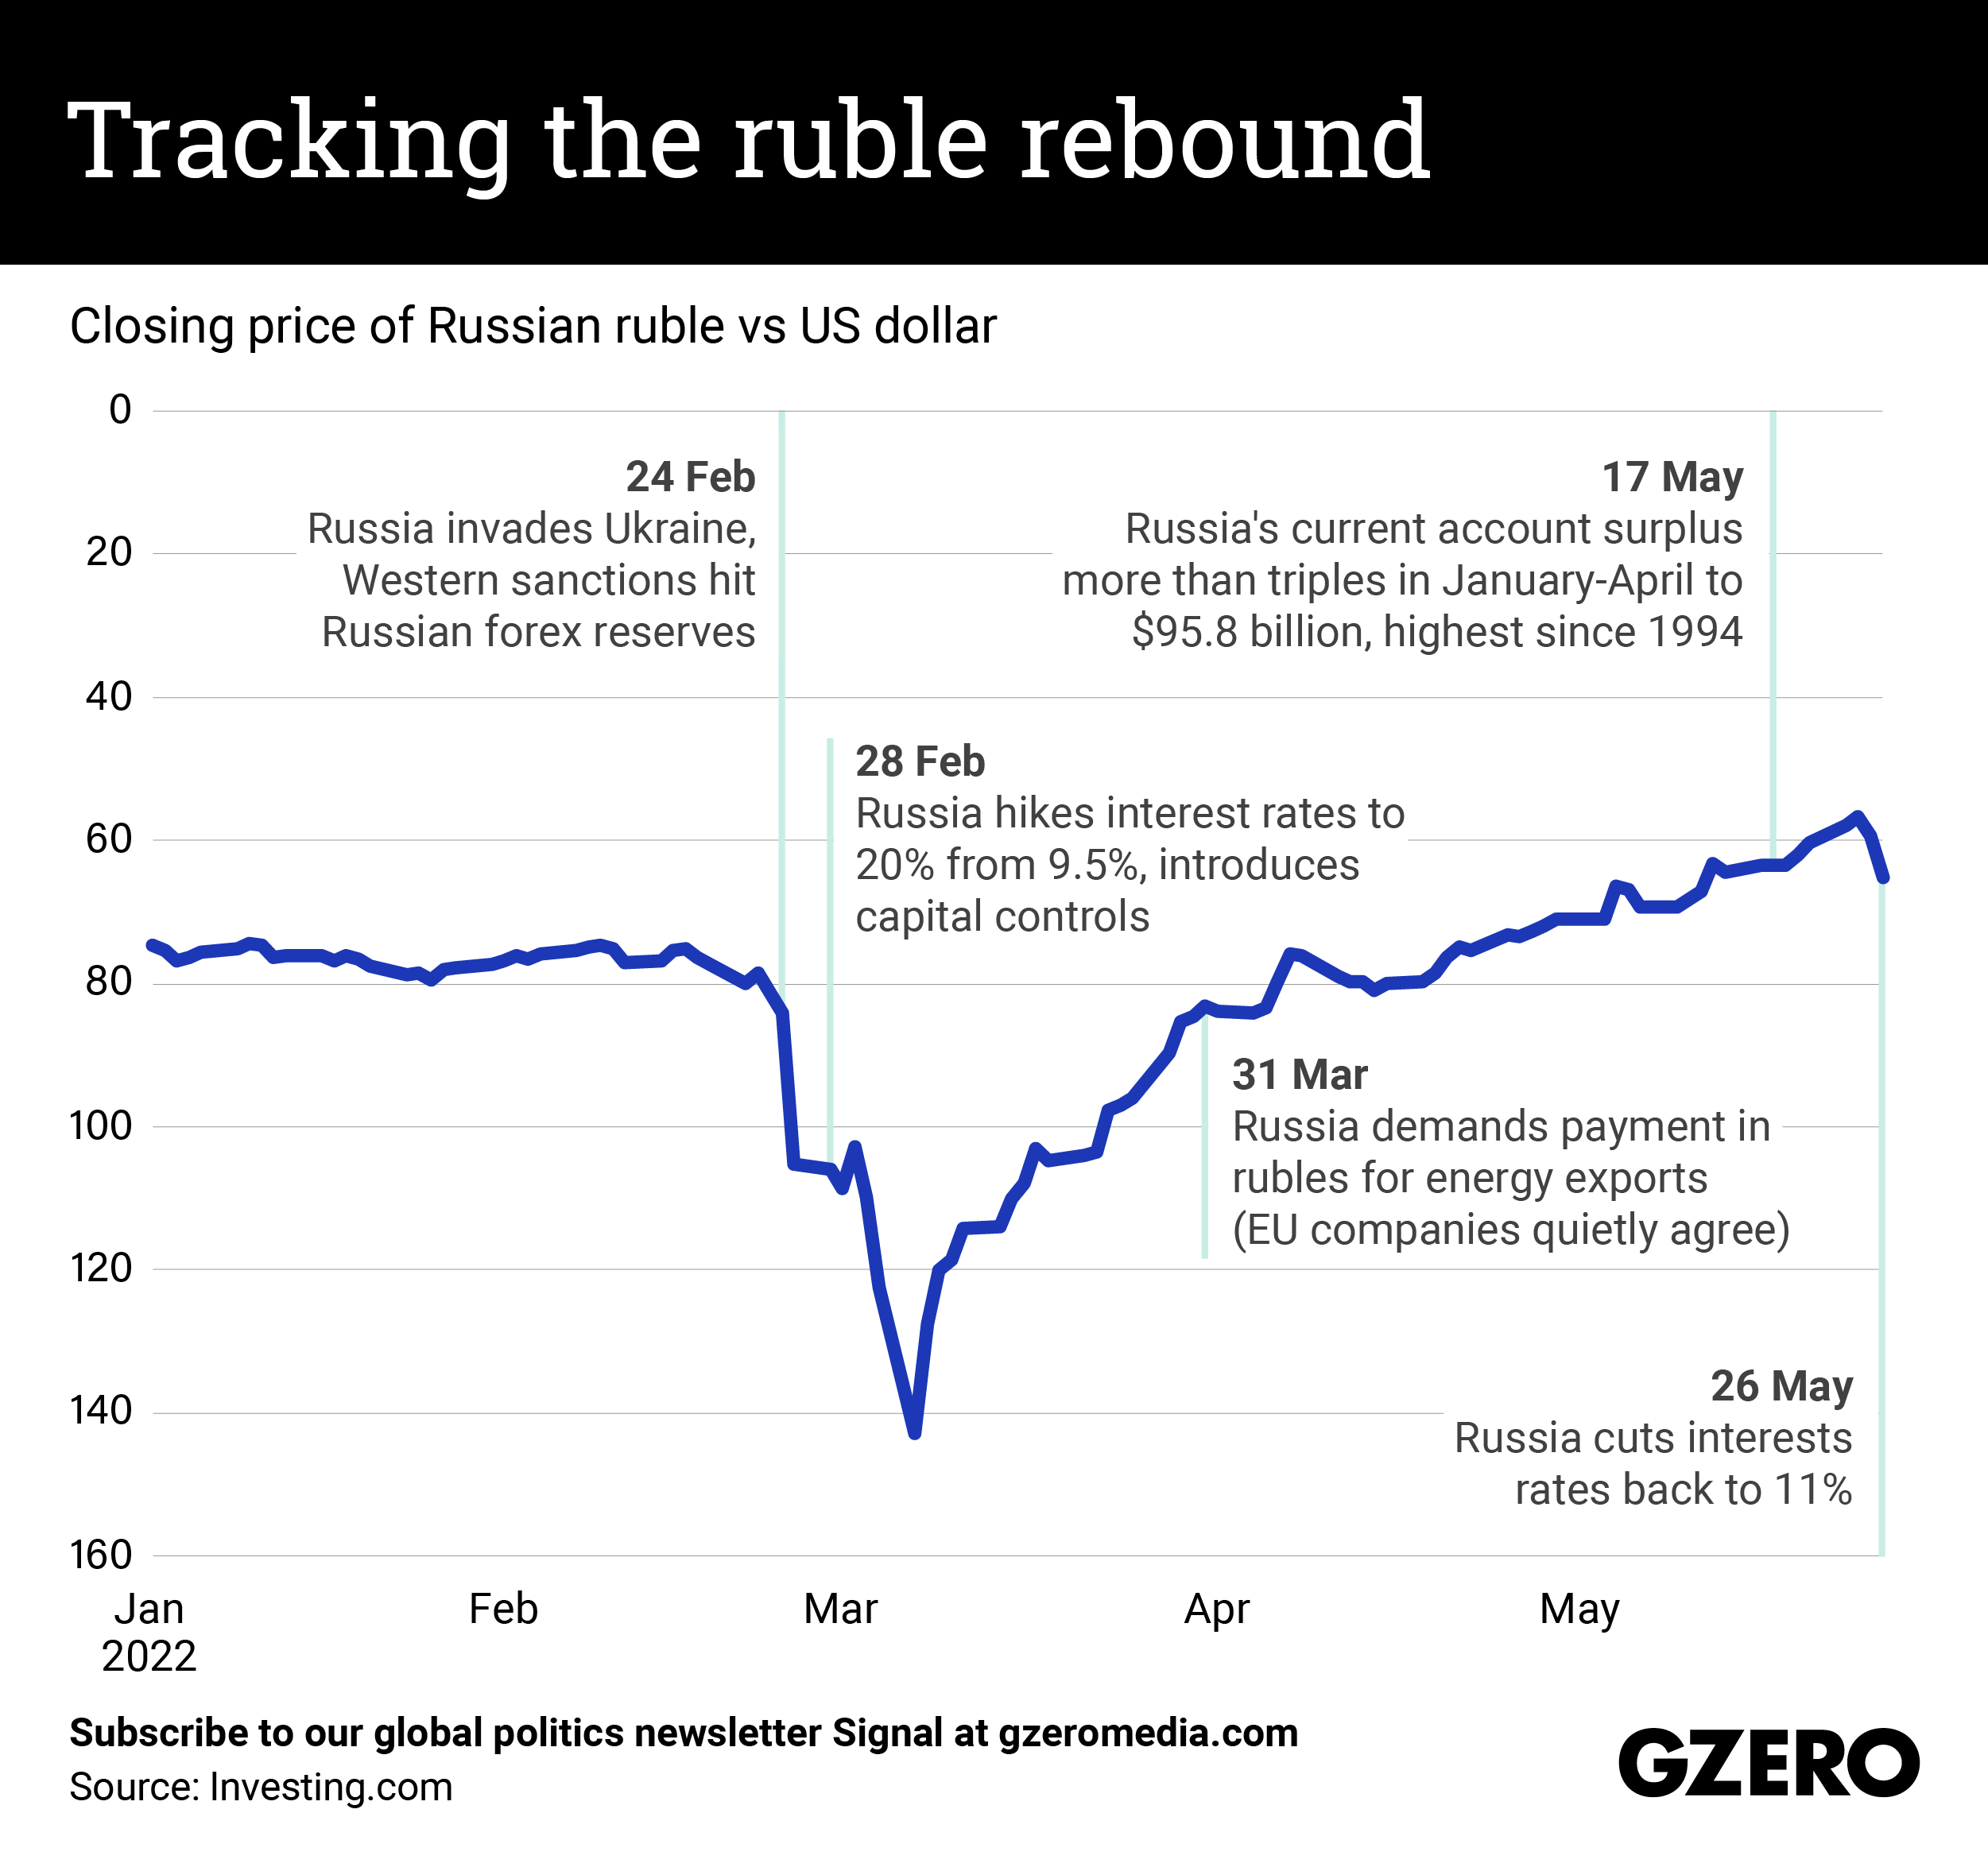 The Graphic Truth: Tracking the ruble rebound